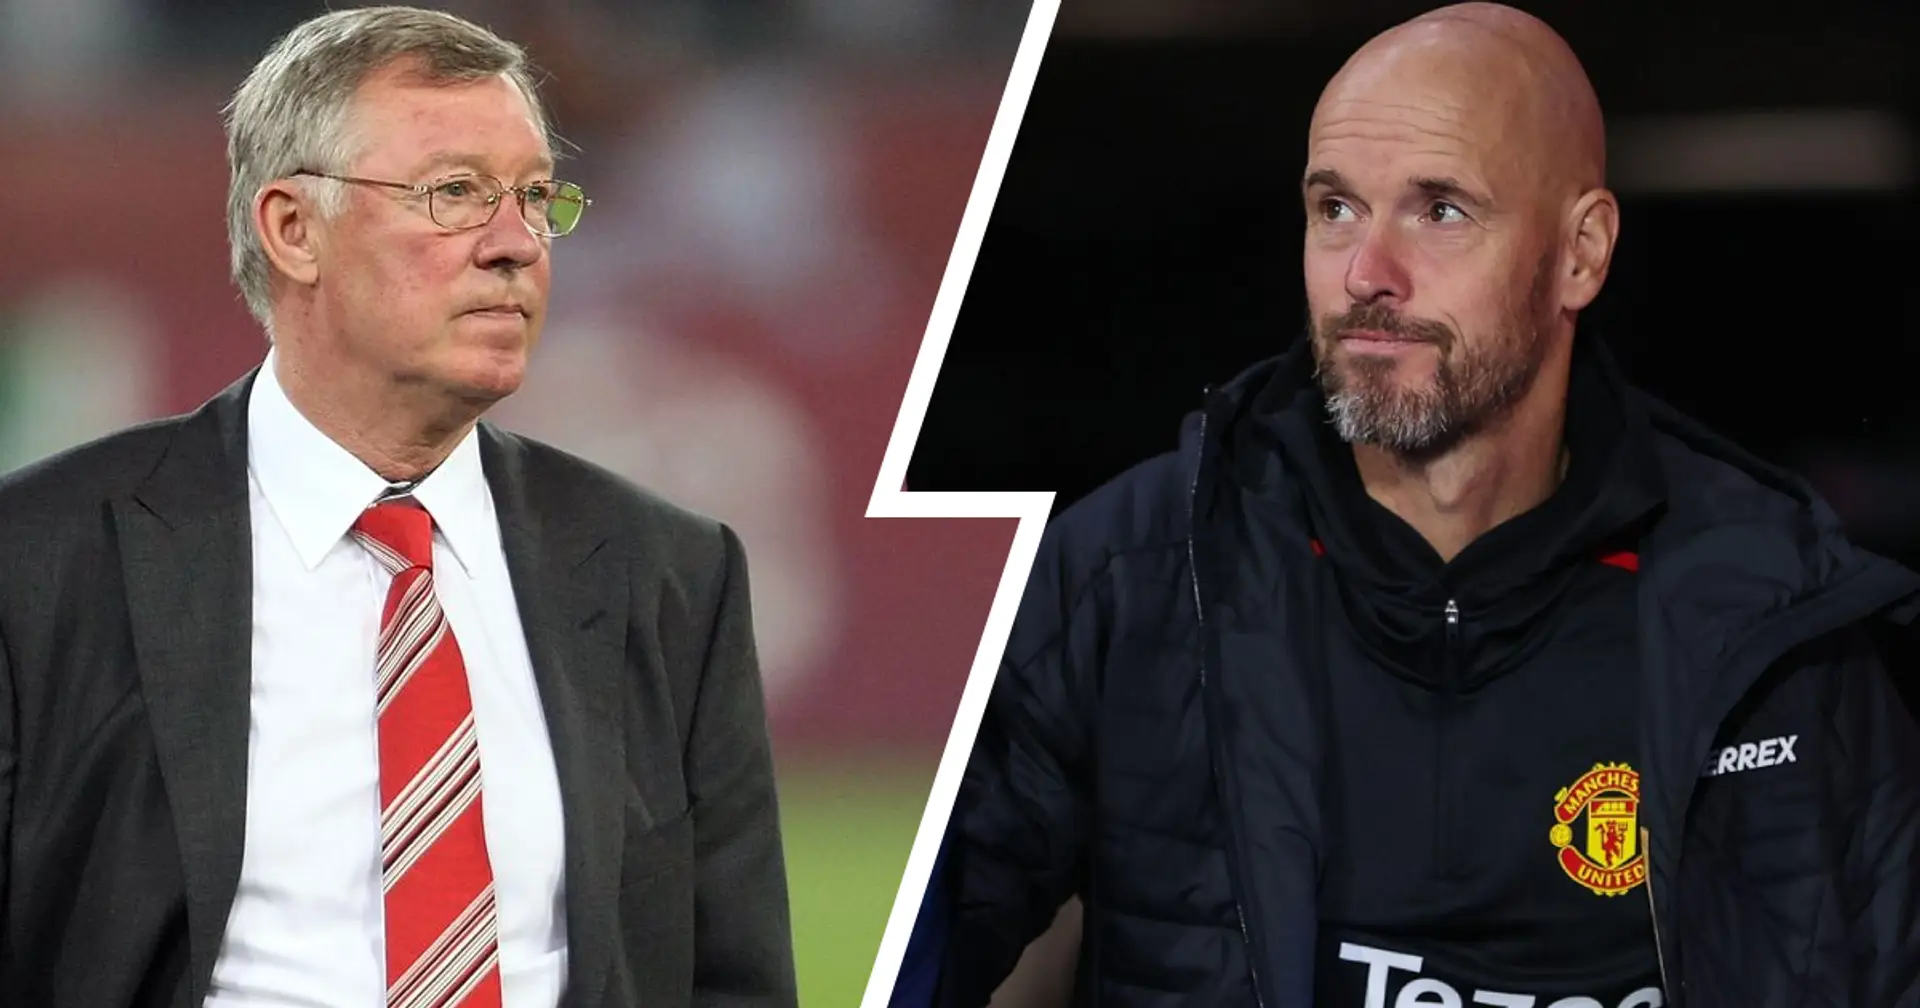 Ten Hag beats Sir Alex to set incredible new record as Man United manager